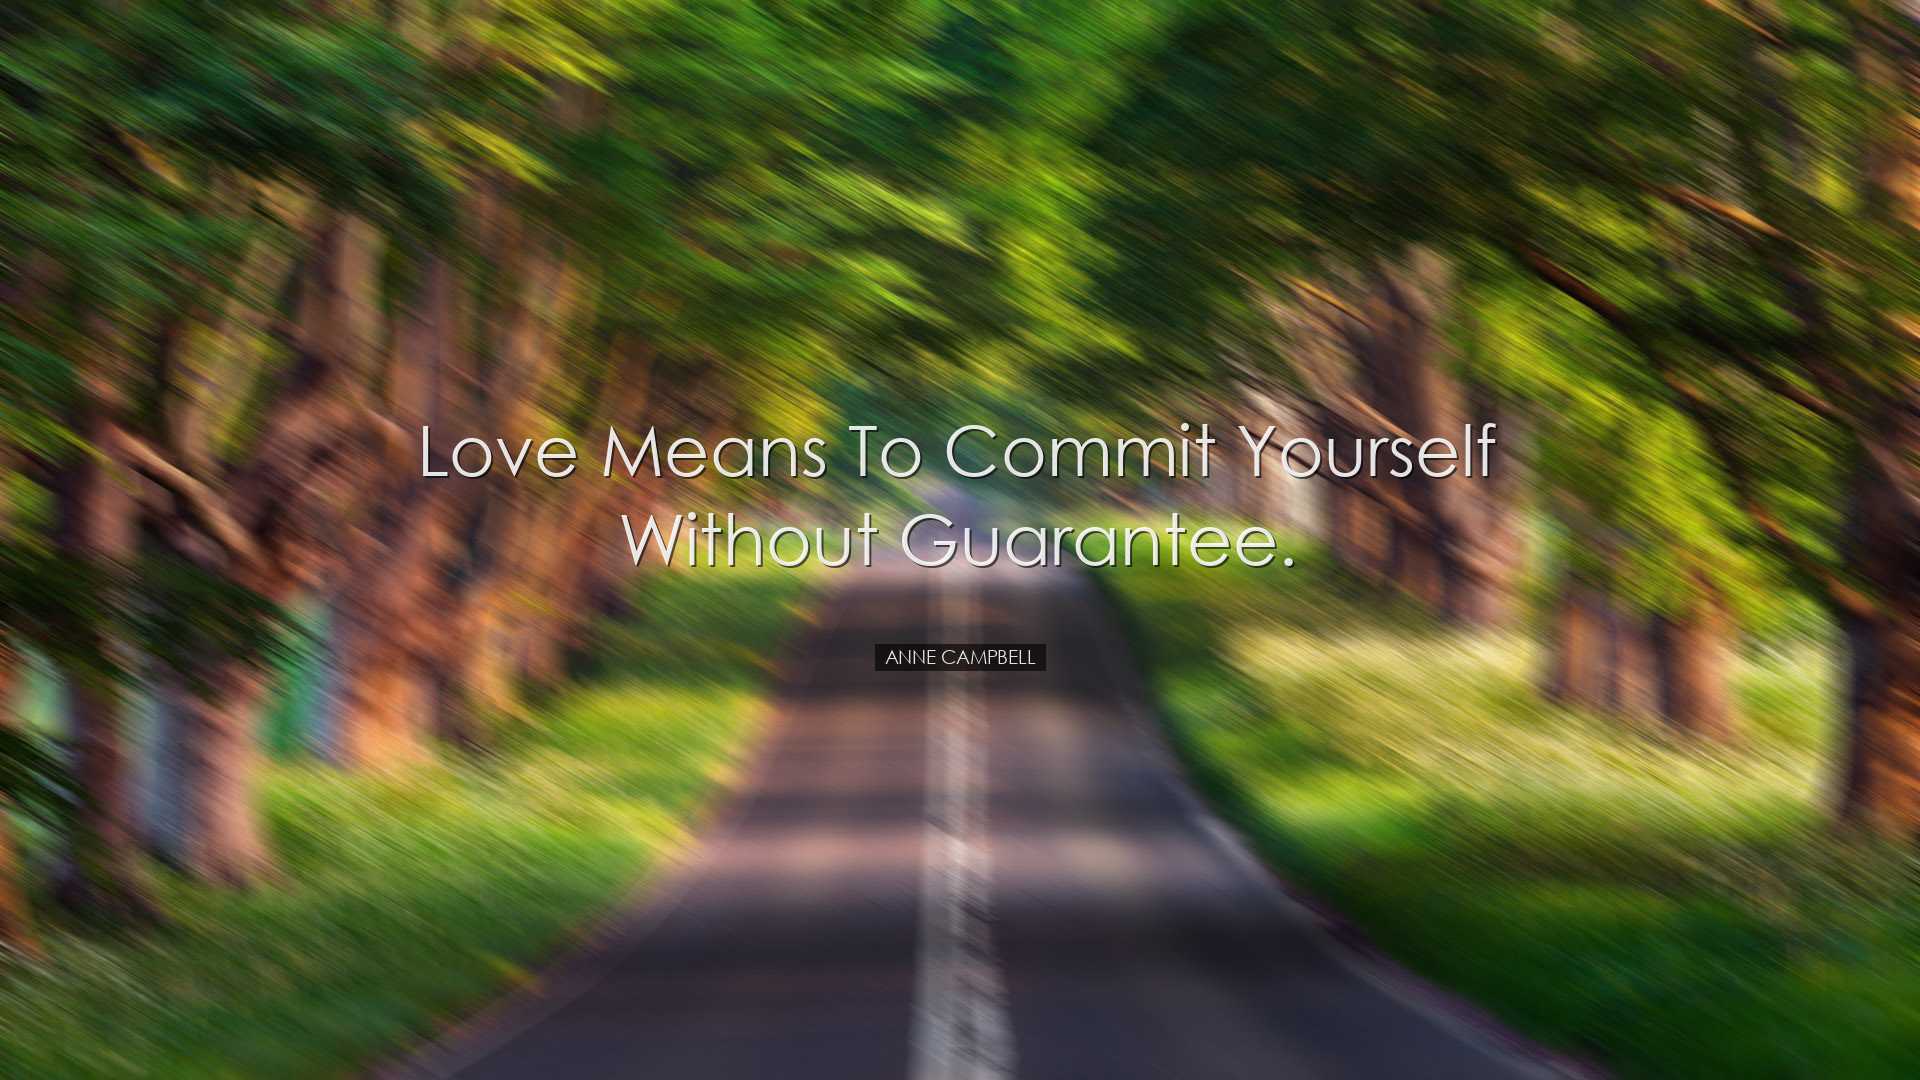 Love means to commit yourself without guarantee. - Anne Campbell